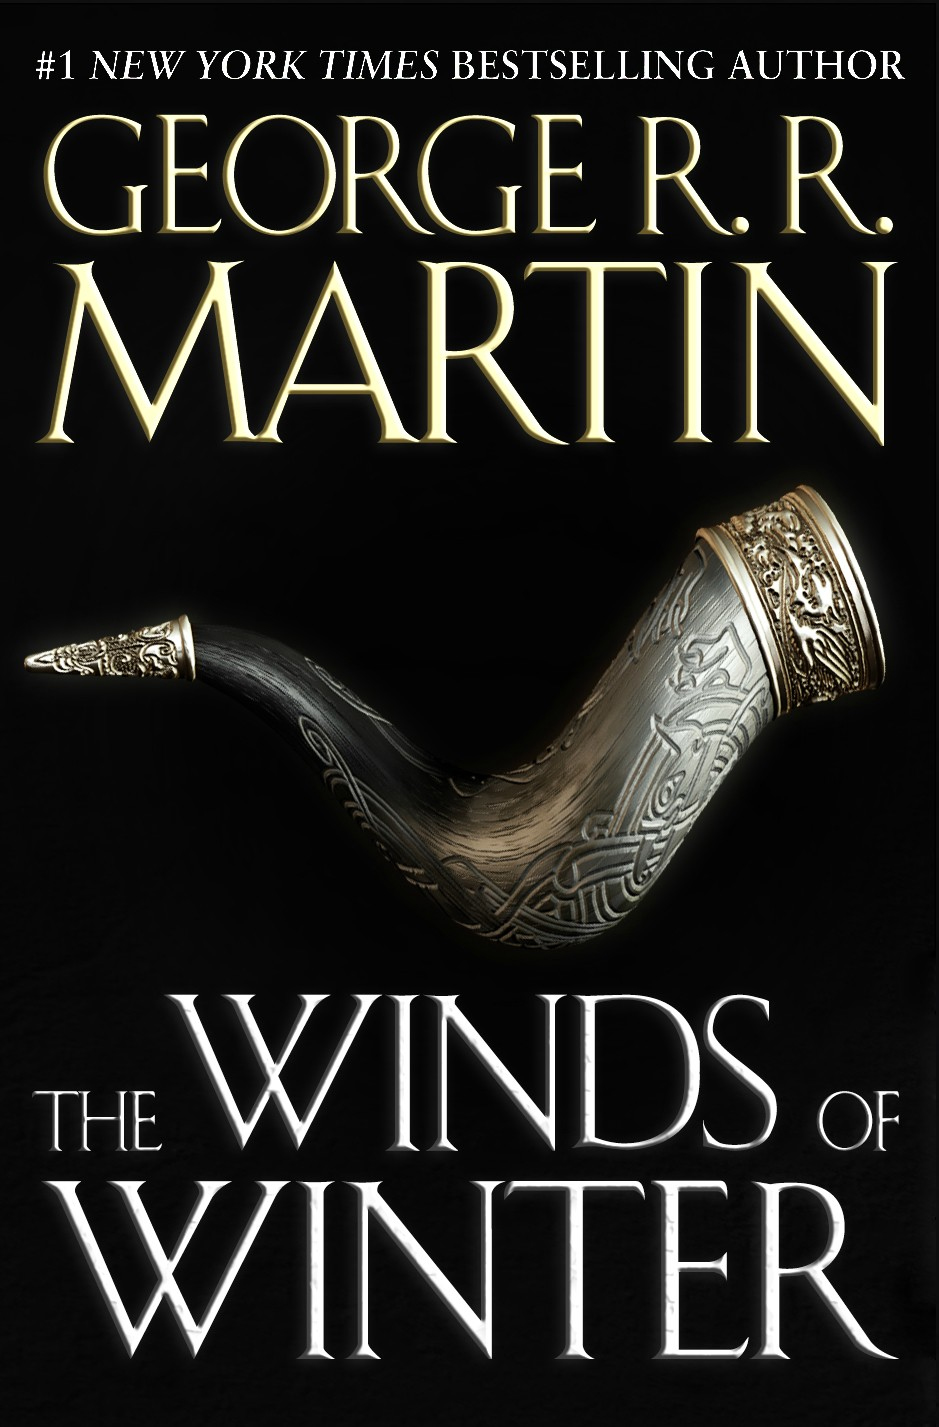 George RR Martin’s Winds of Winter will not be released before Game of Thrones Season Six